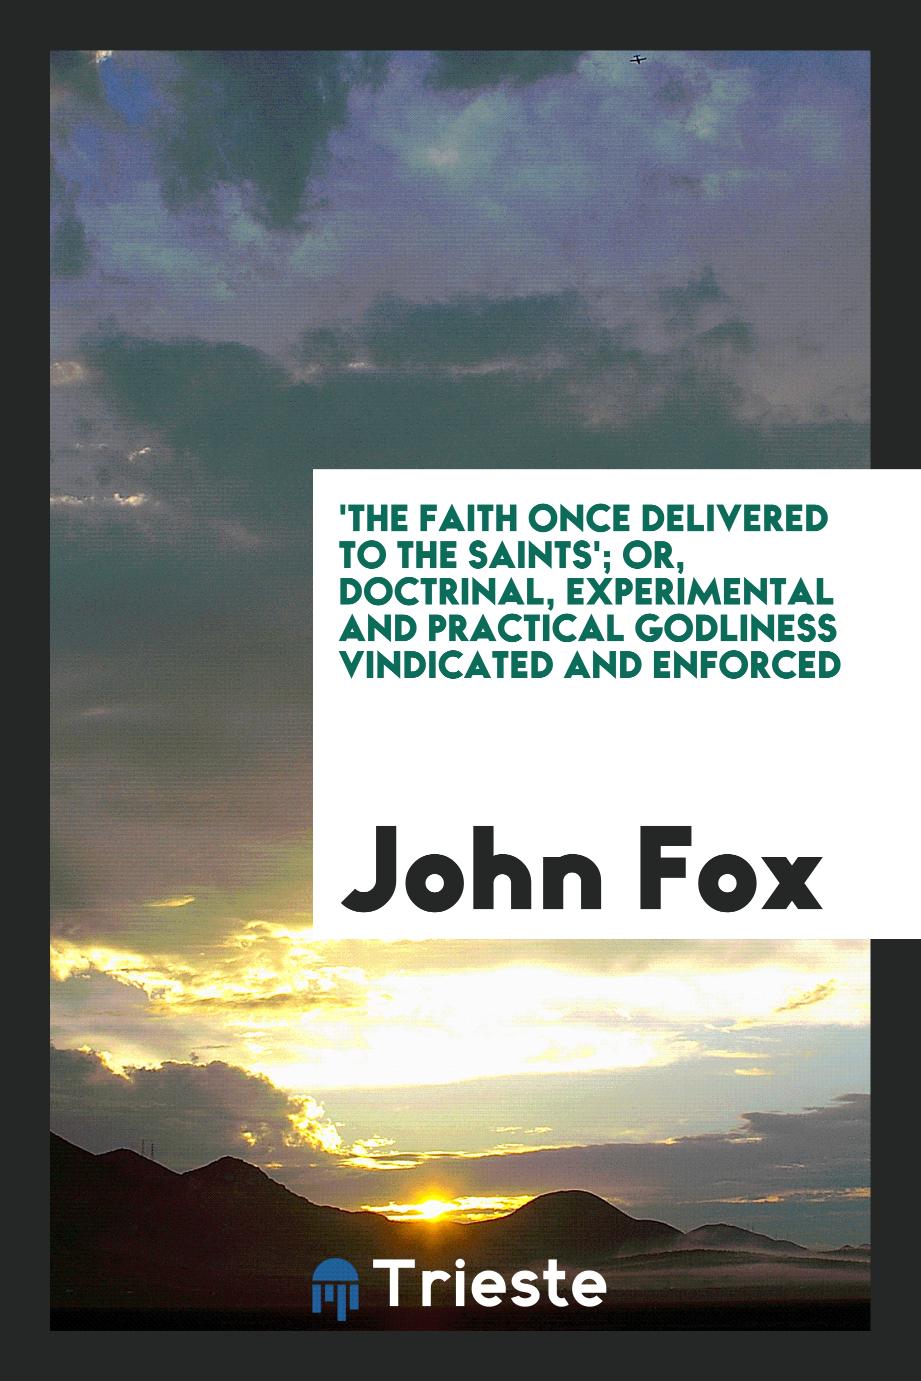 'The faith once delivered to the saints'; or, Doctrinal, experimental and practical godliness vindicated and enforced